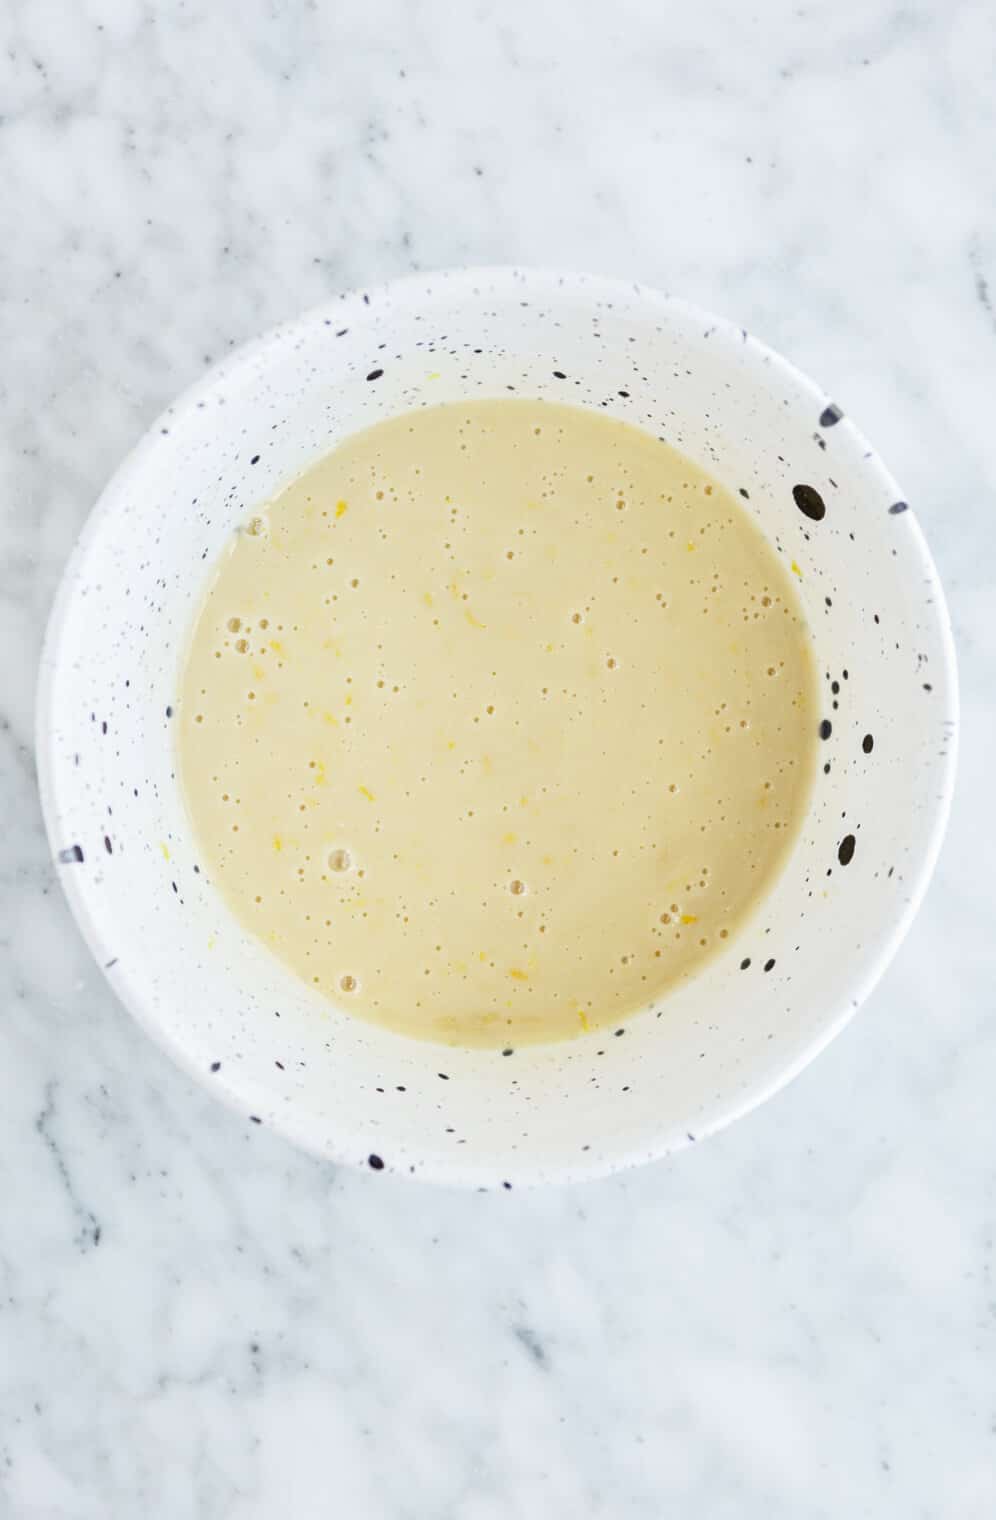 Custard ingredients blended in a black and white speckled bowl.